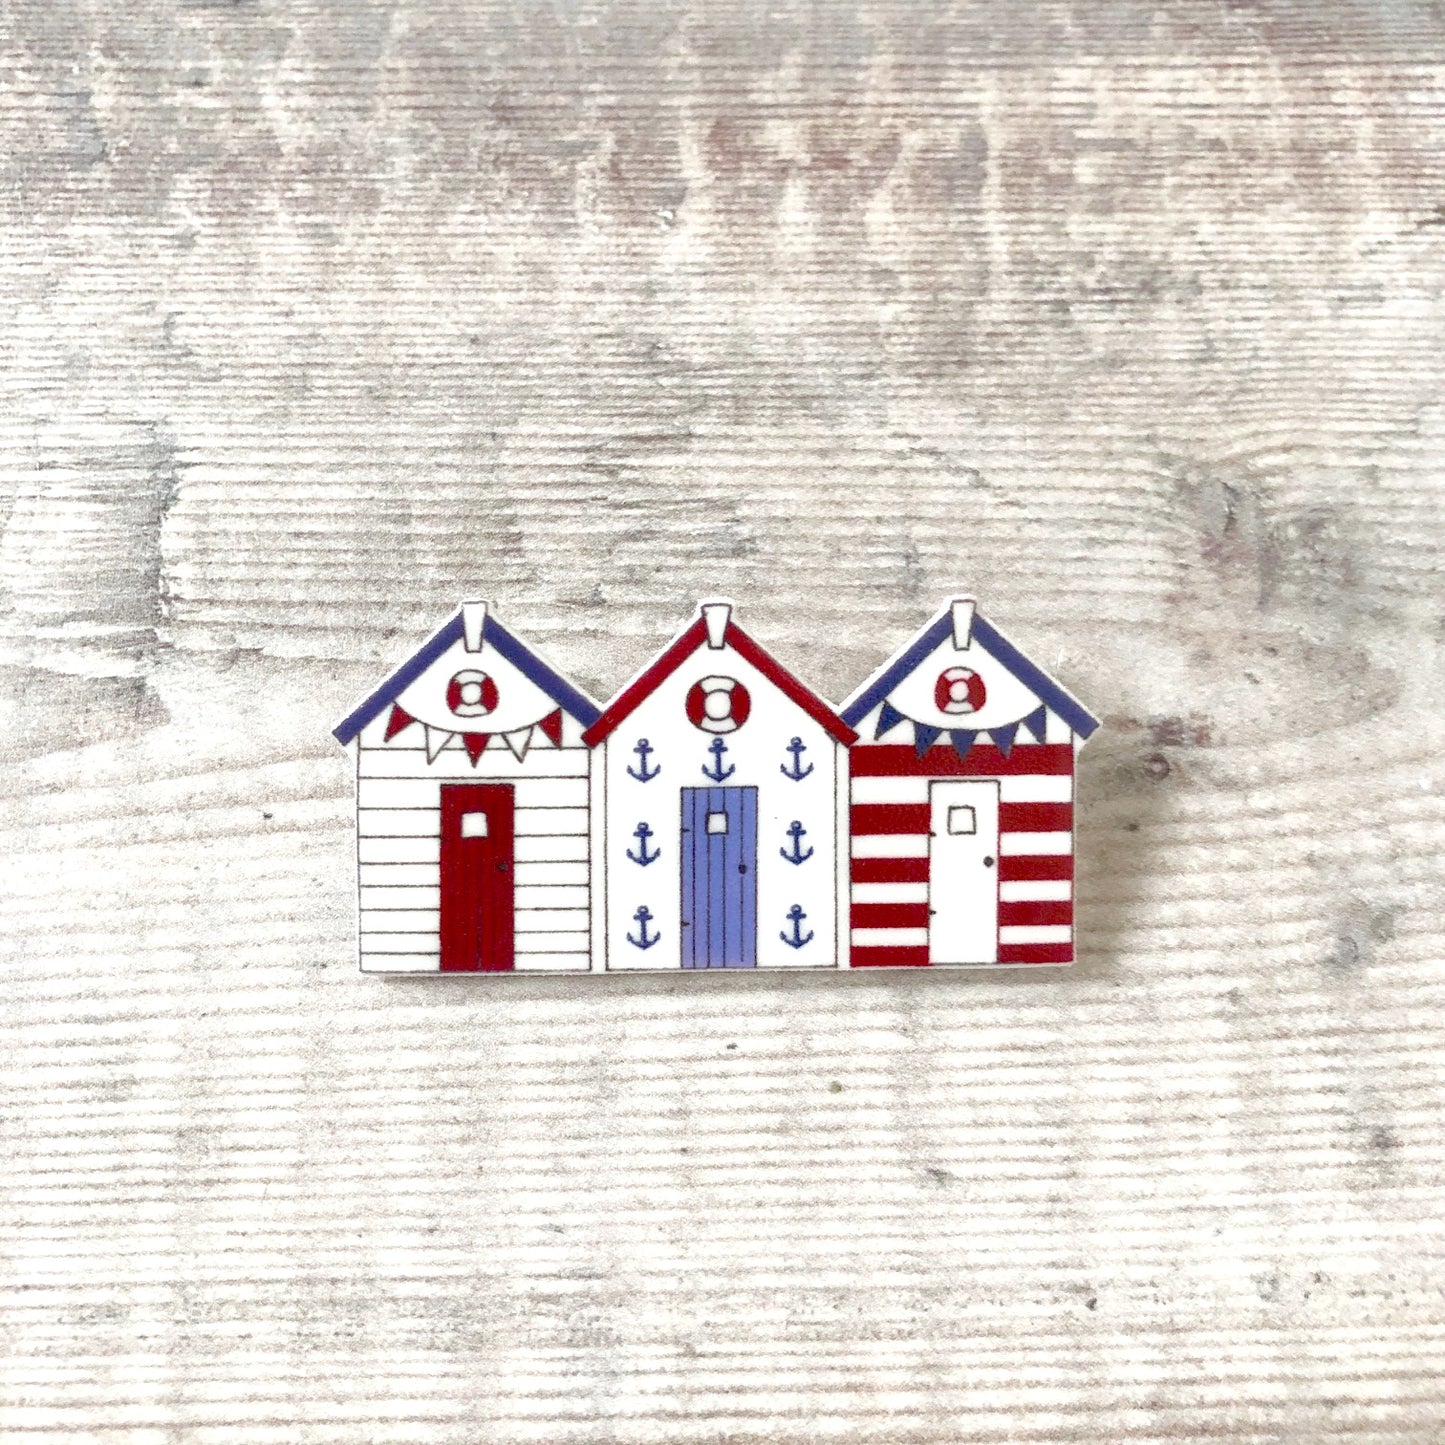 Beach huts pin badge - Summer brooch - Nautical jewellery - Gift for her